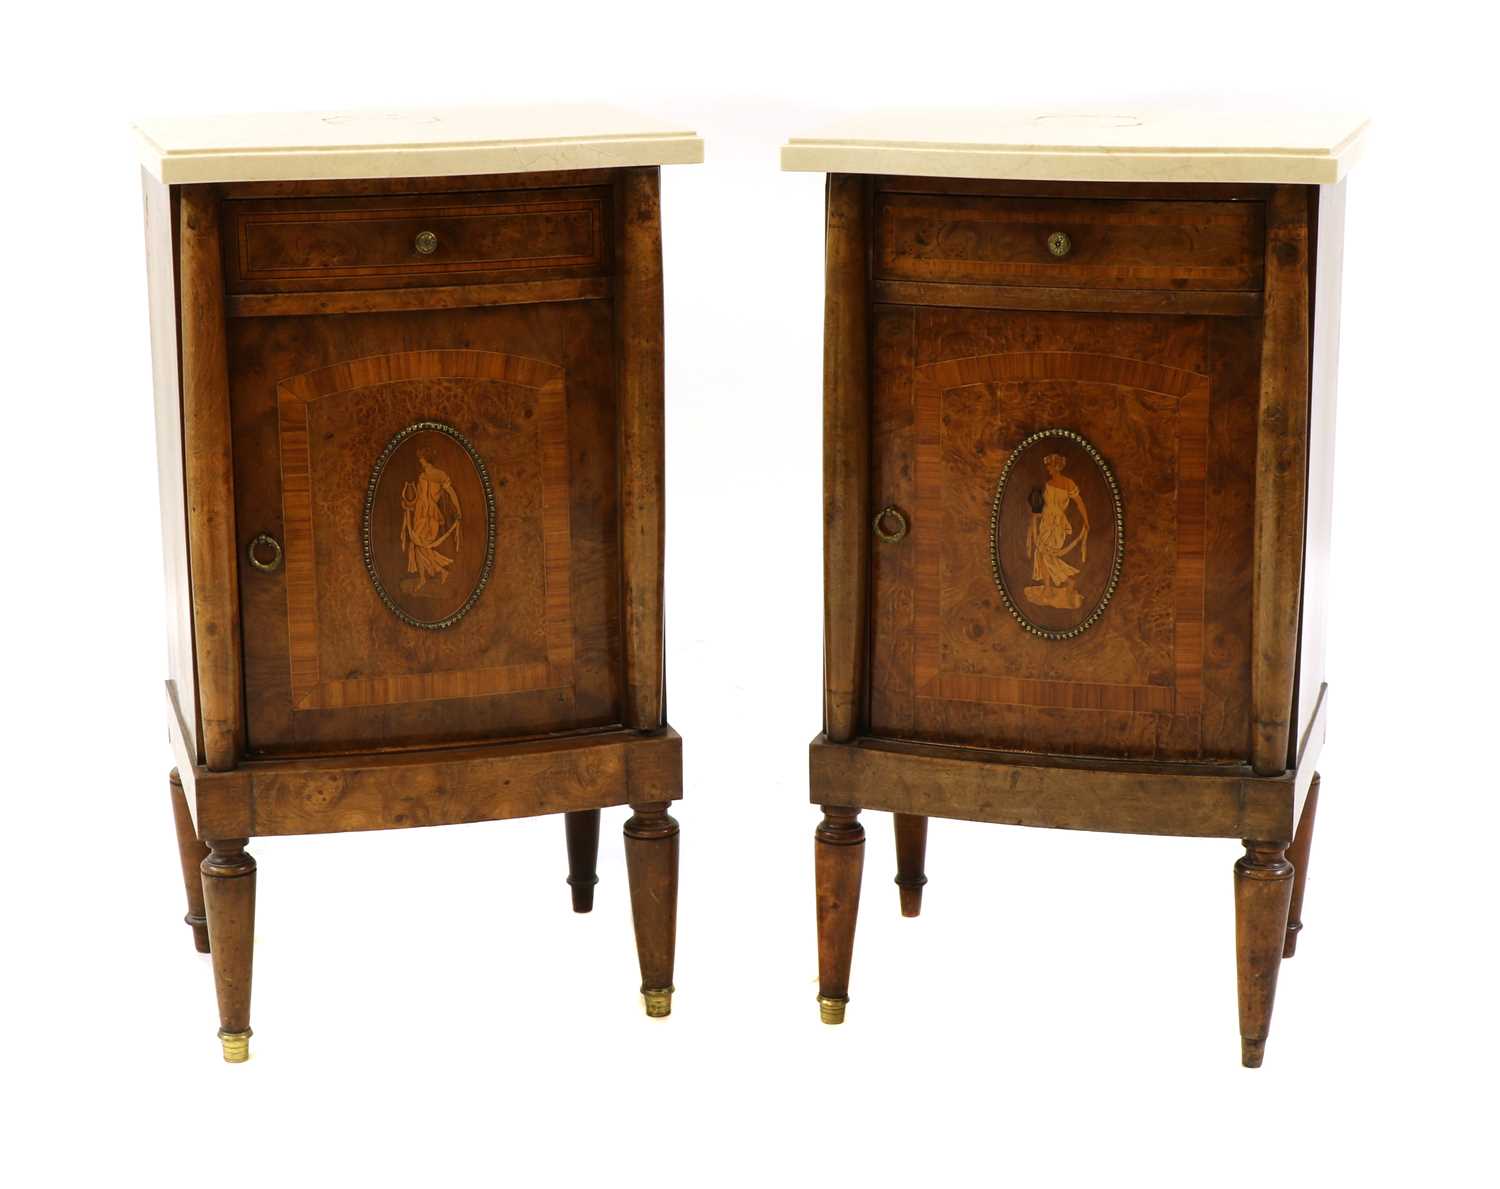 Lot 386 - A pair of Northern European bedside cabinets